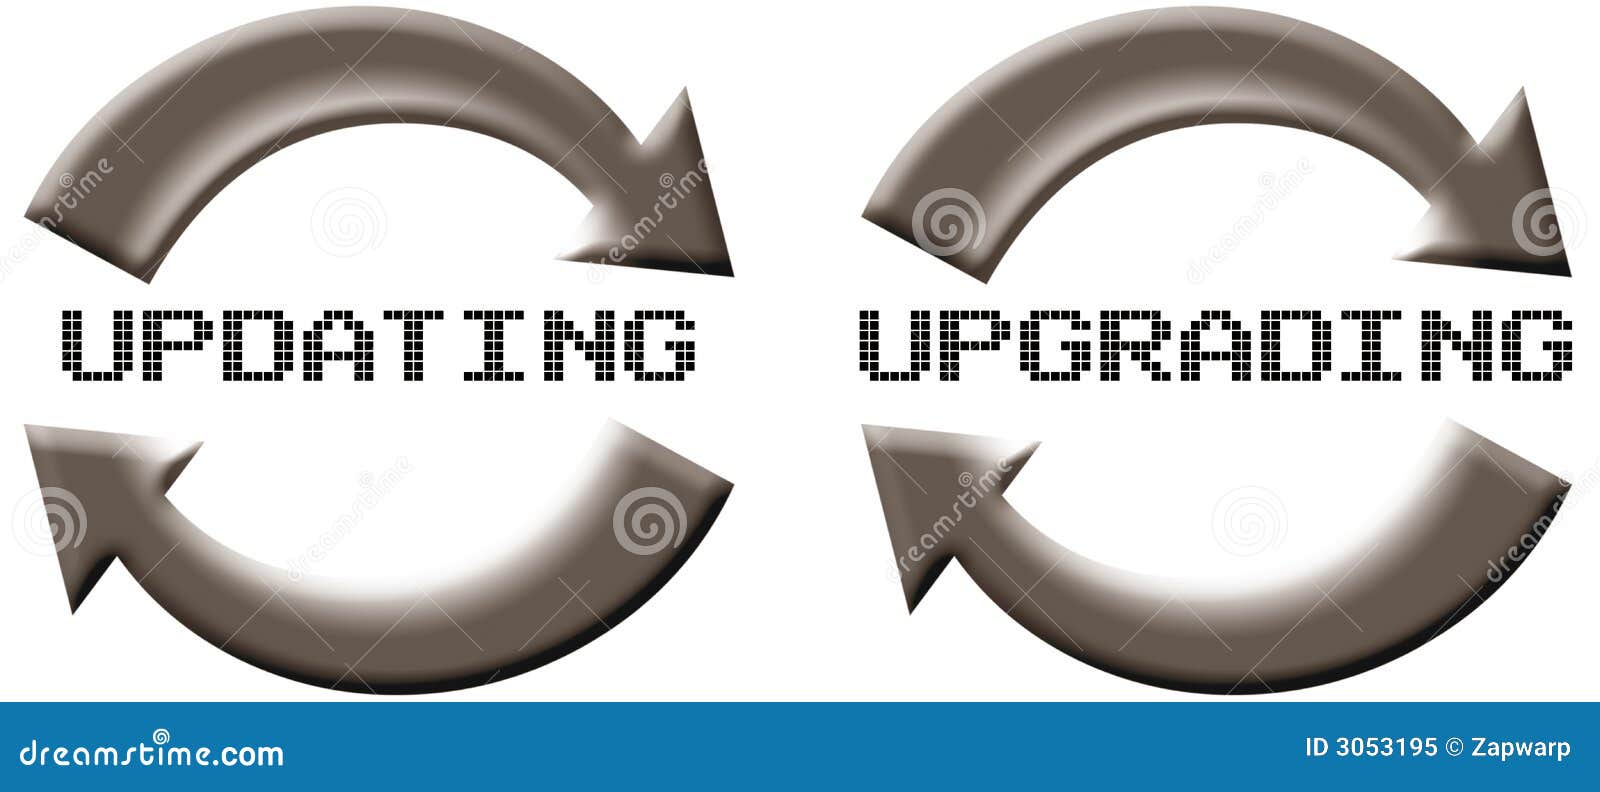 Updating Or Upgrading Process Icon With Progress Bar Or Synchronize